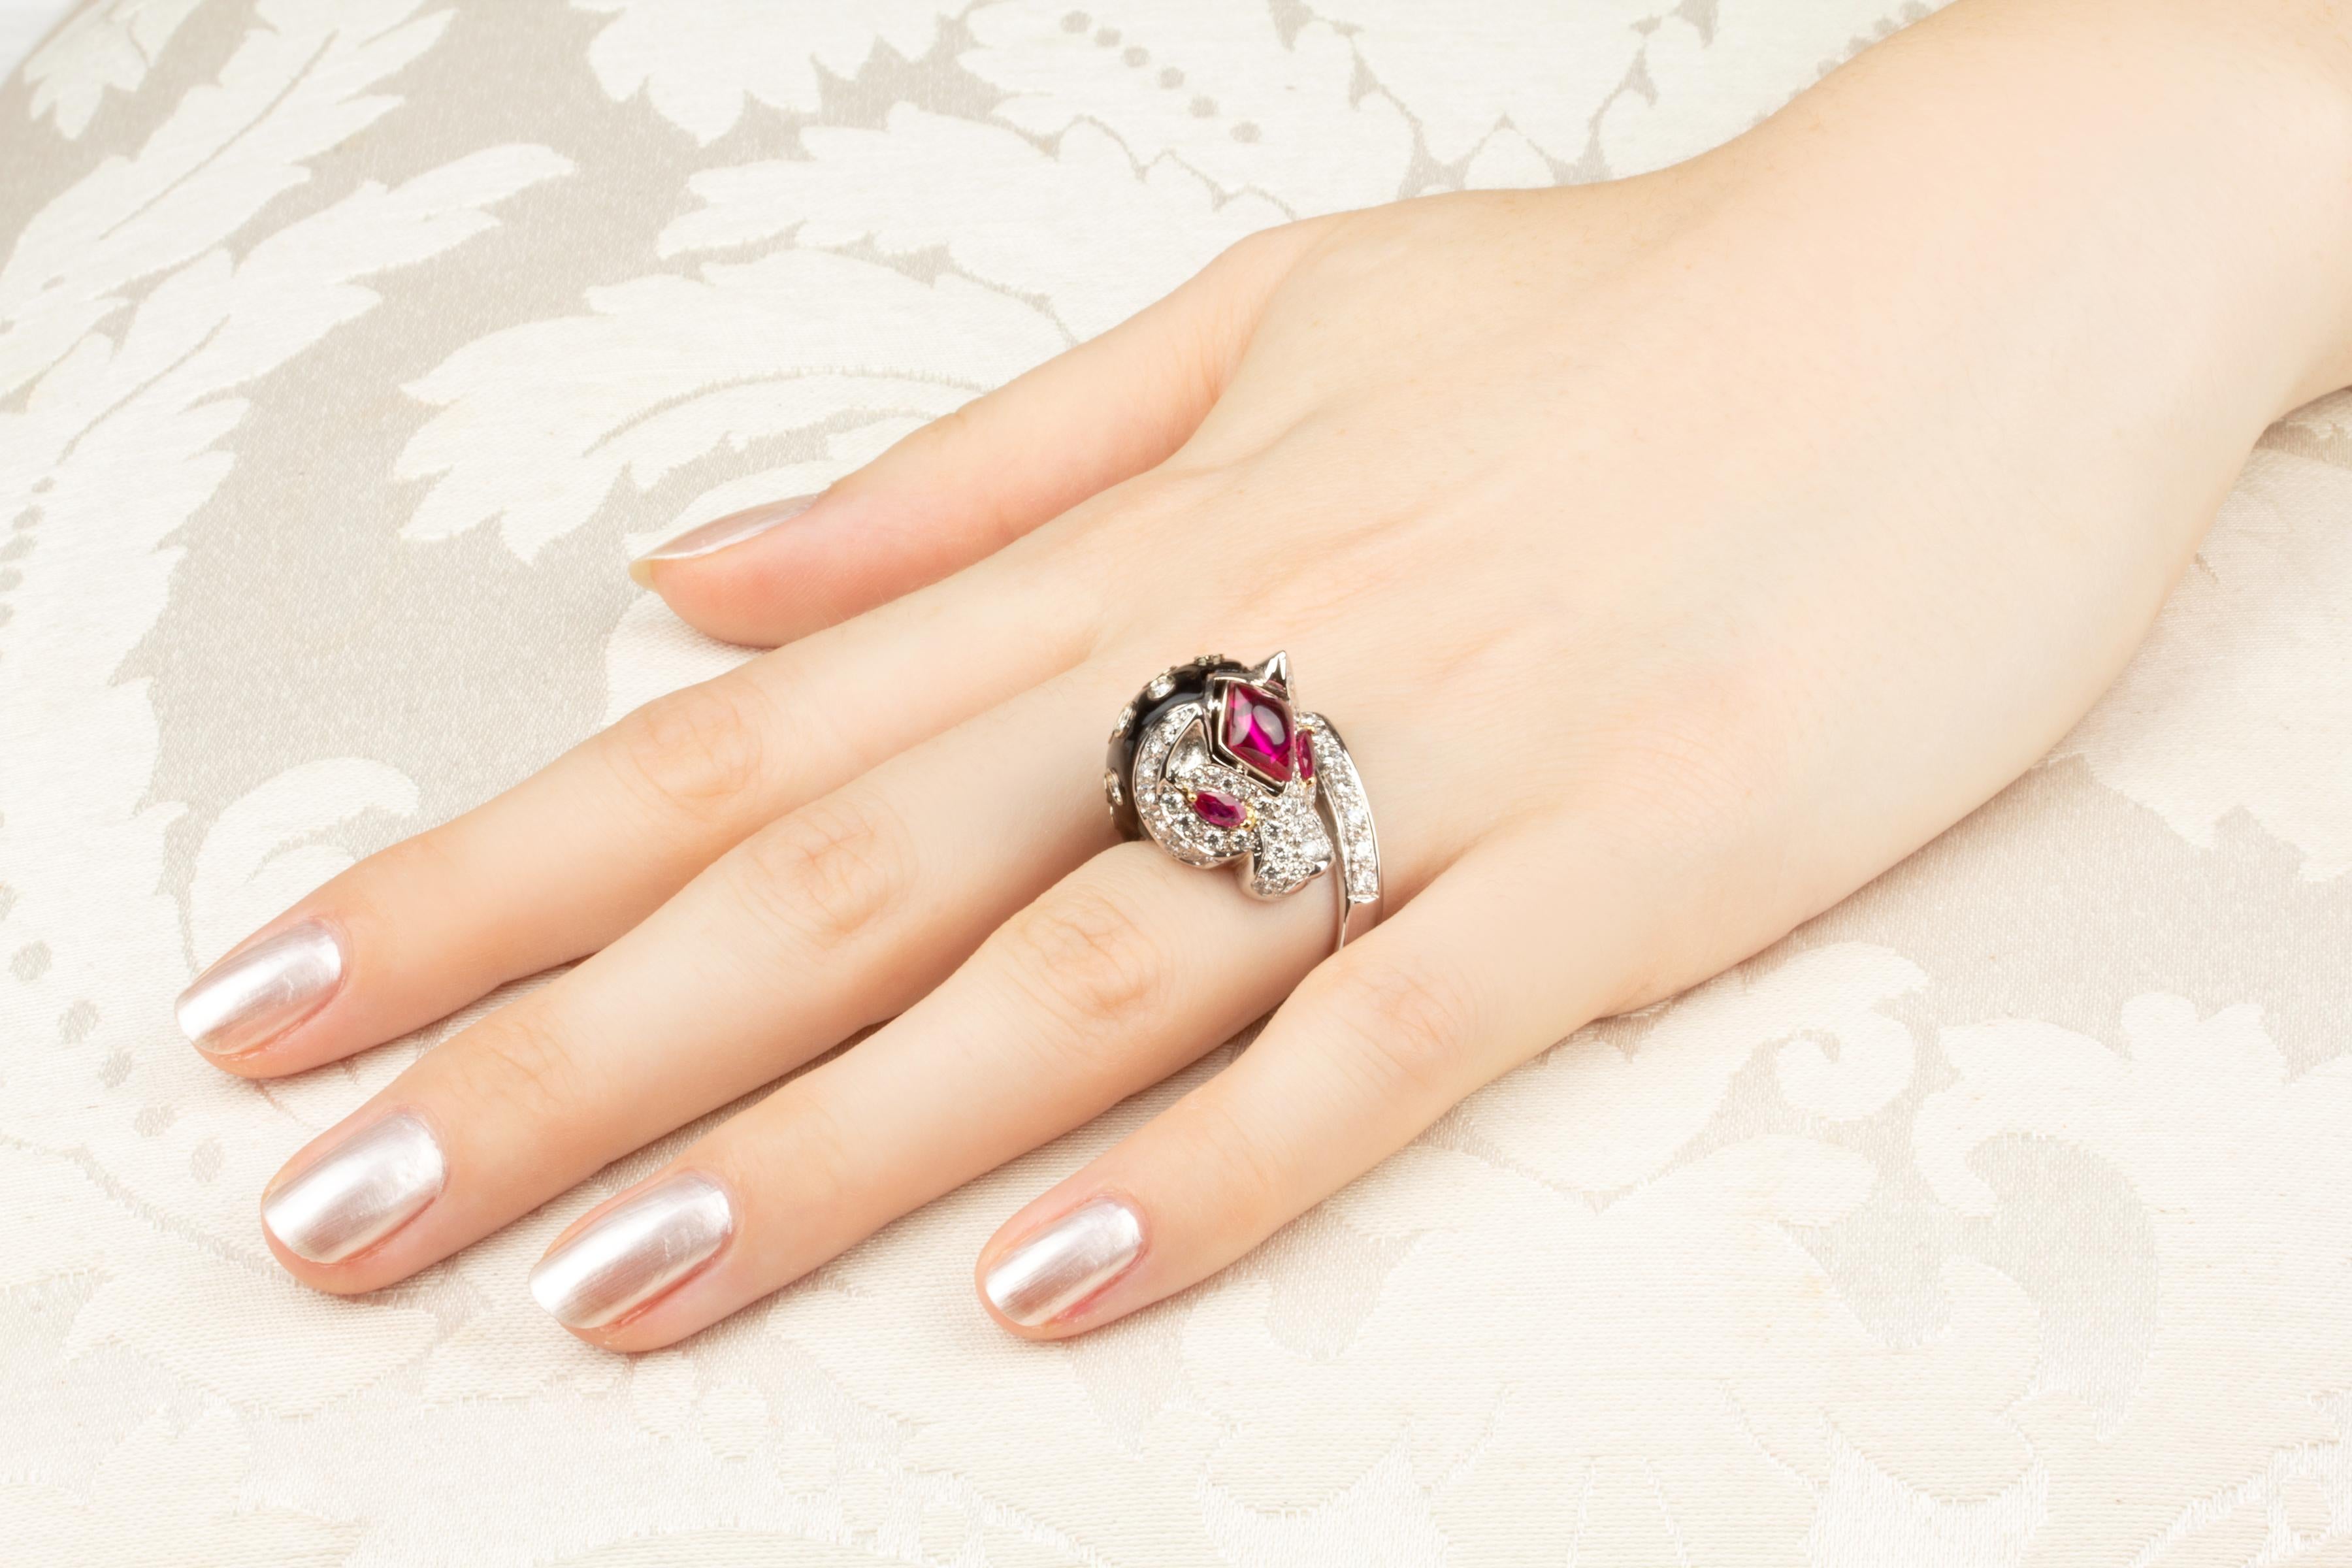 This tiger ring features 2.20 carats of round diamonds of top quality (F/G-VVS), some of which are expertly set in black onyx, lending the jewel a distinctive art déco look. The cub's eyes are set with 0.35 carats of faceted marquise shape rubies.